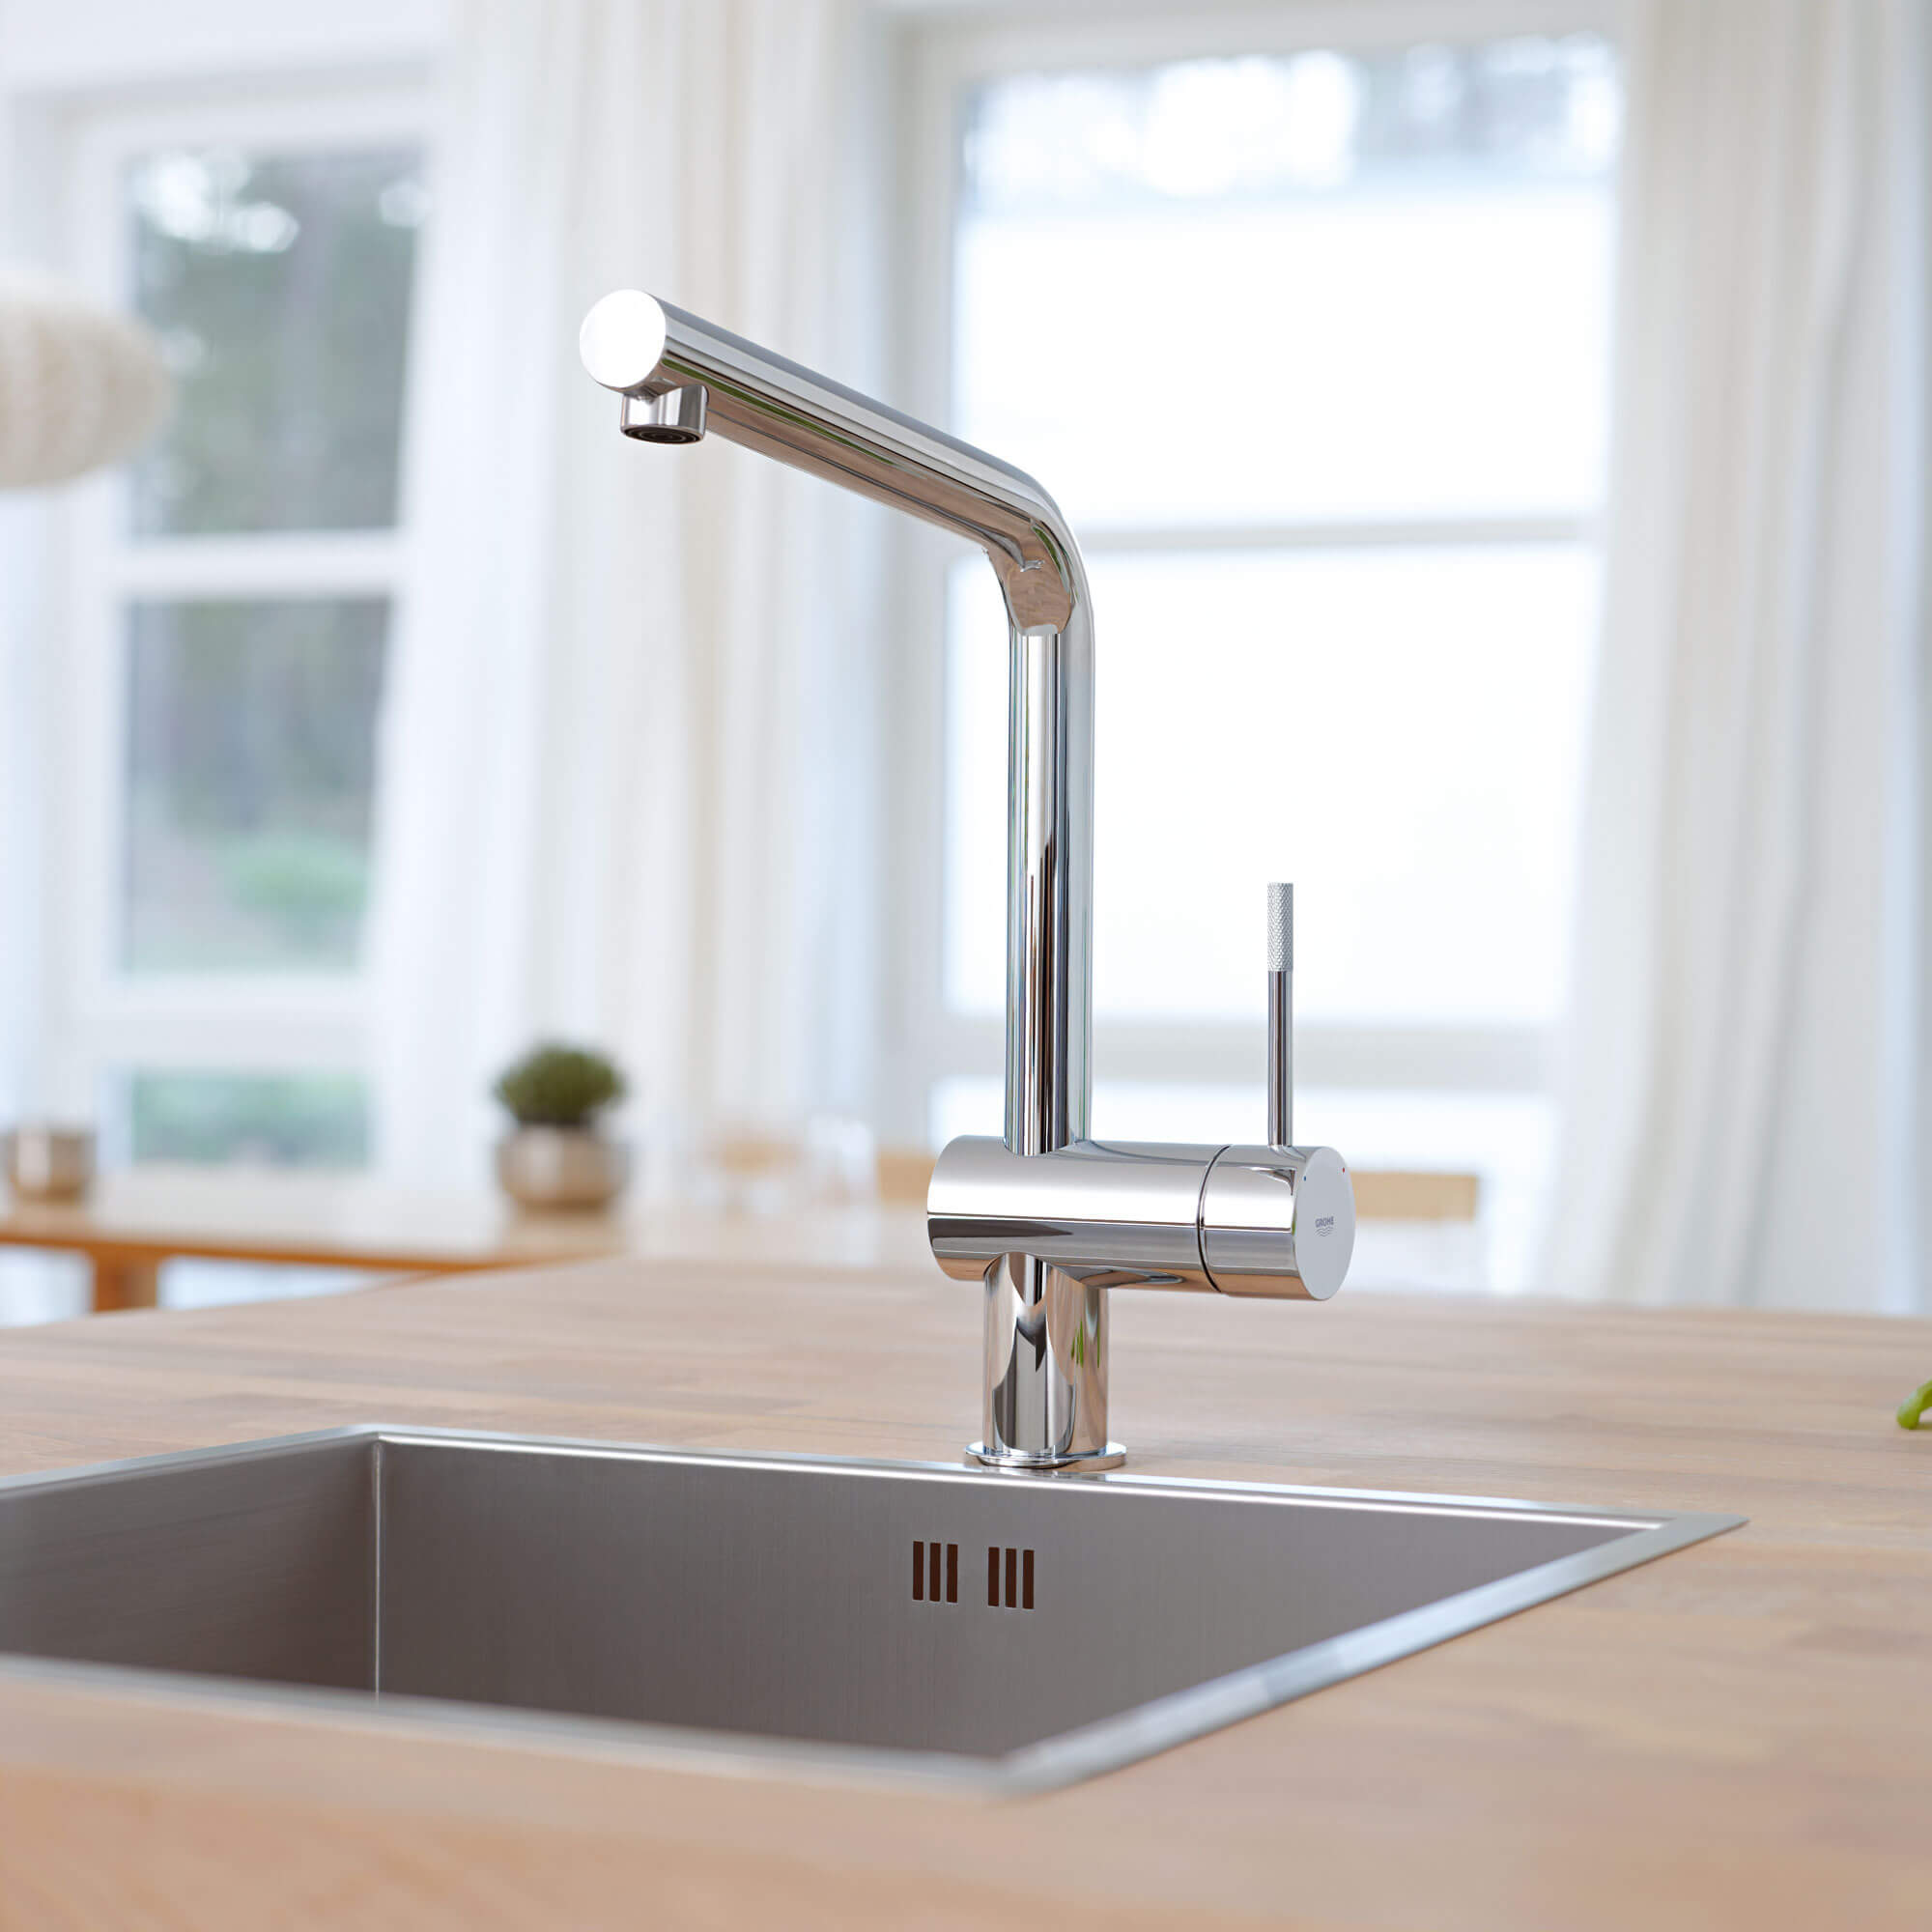 GROHE Minta kitchen faucet